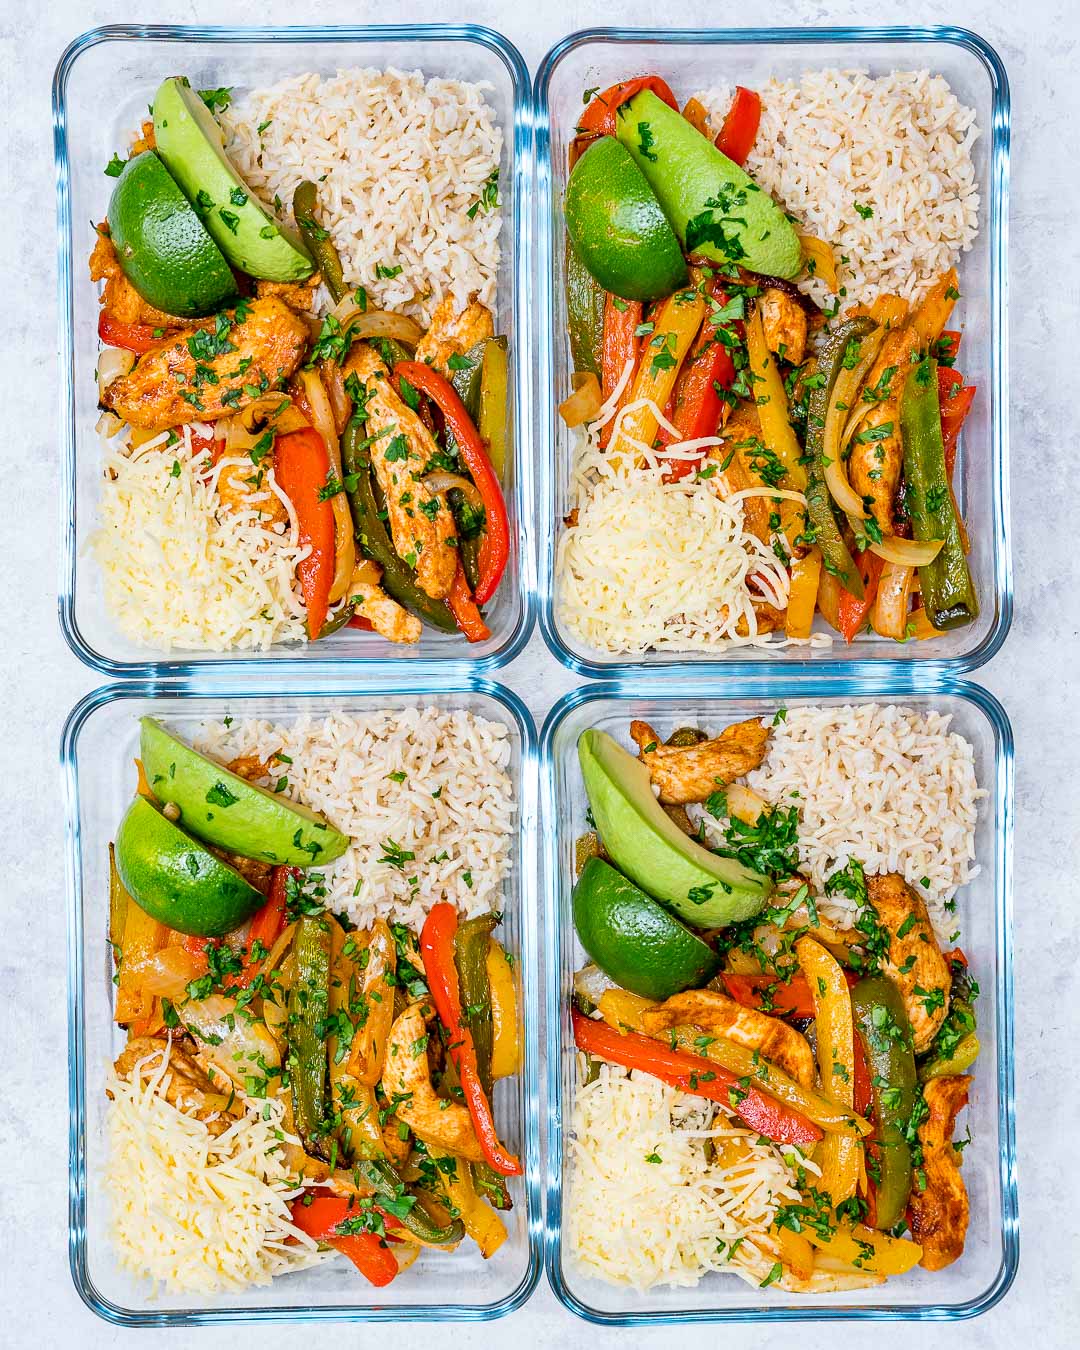 Oven-Baked Chicken Fajita Bowls for Clean Eating Meal Prep! | Clean ...